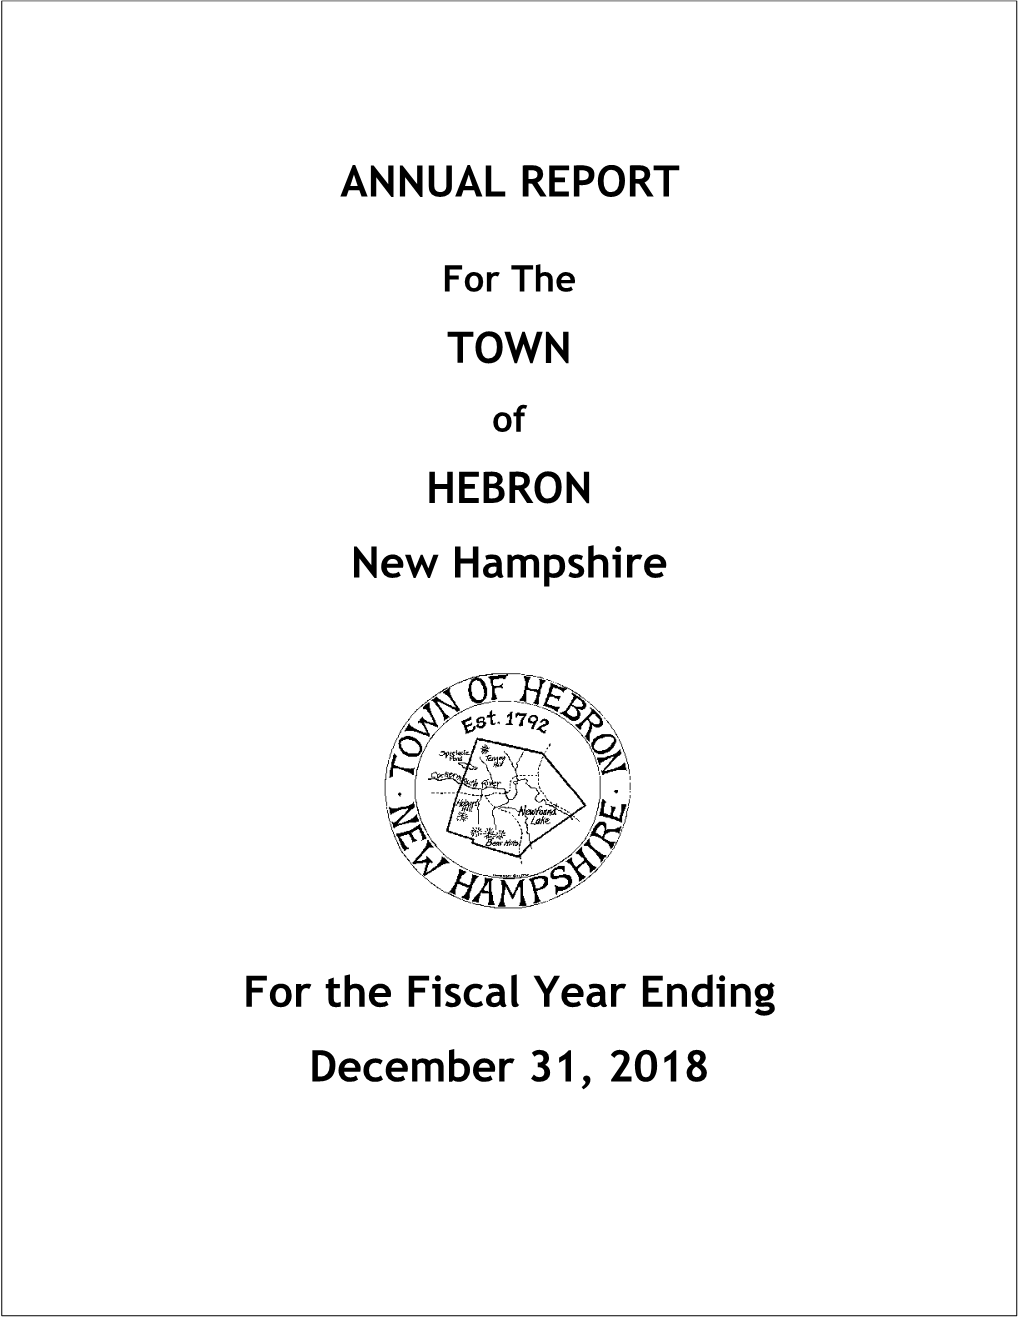 ANNUAL REPORT TOWN HEBRON New Hampshire for the Fiscal Year